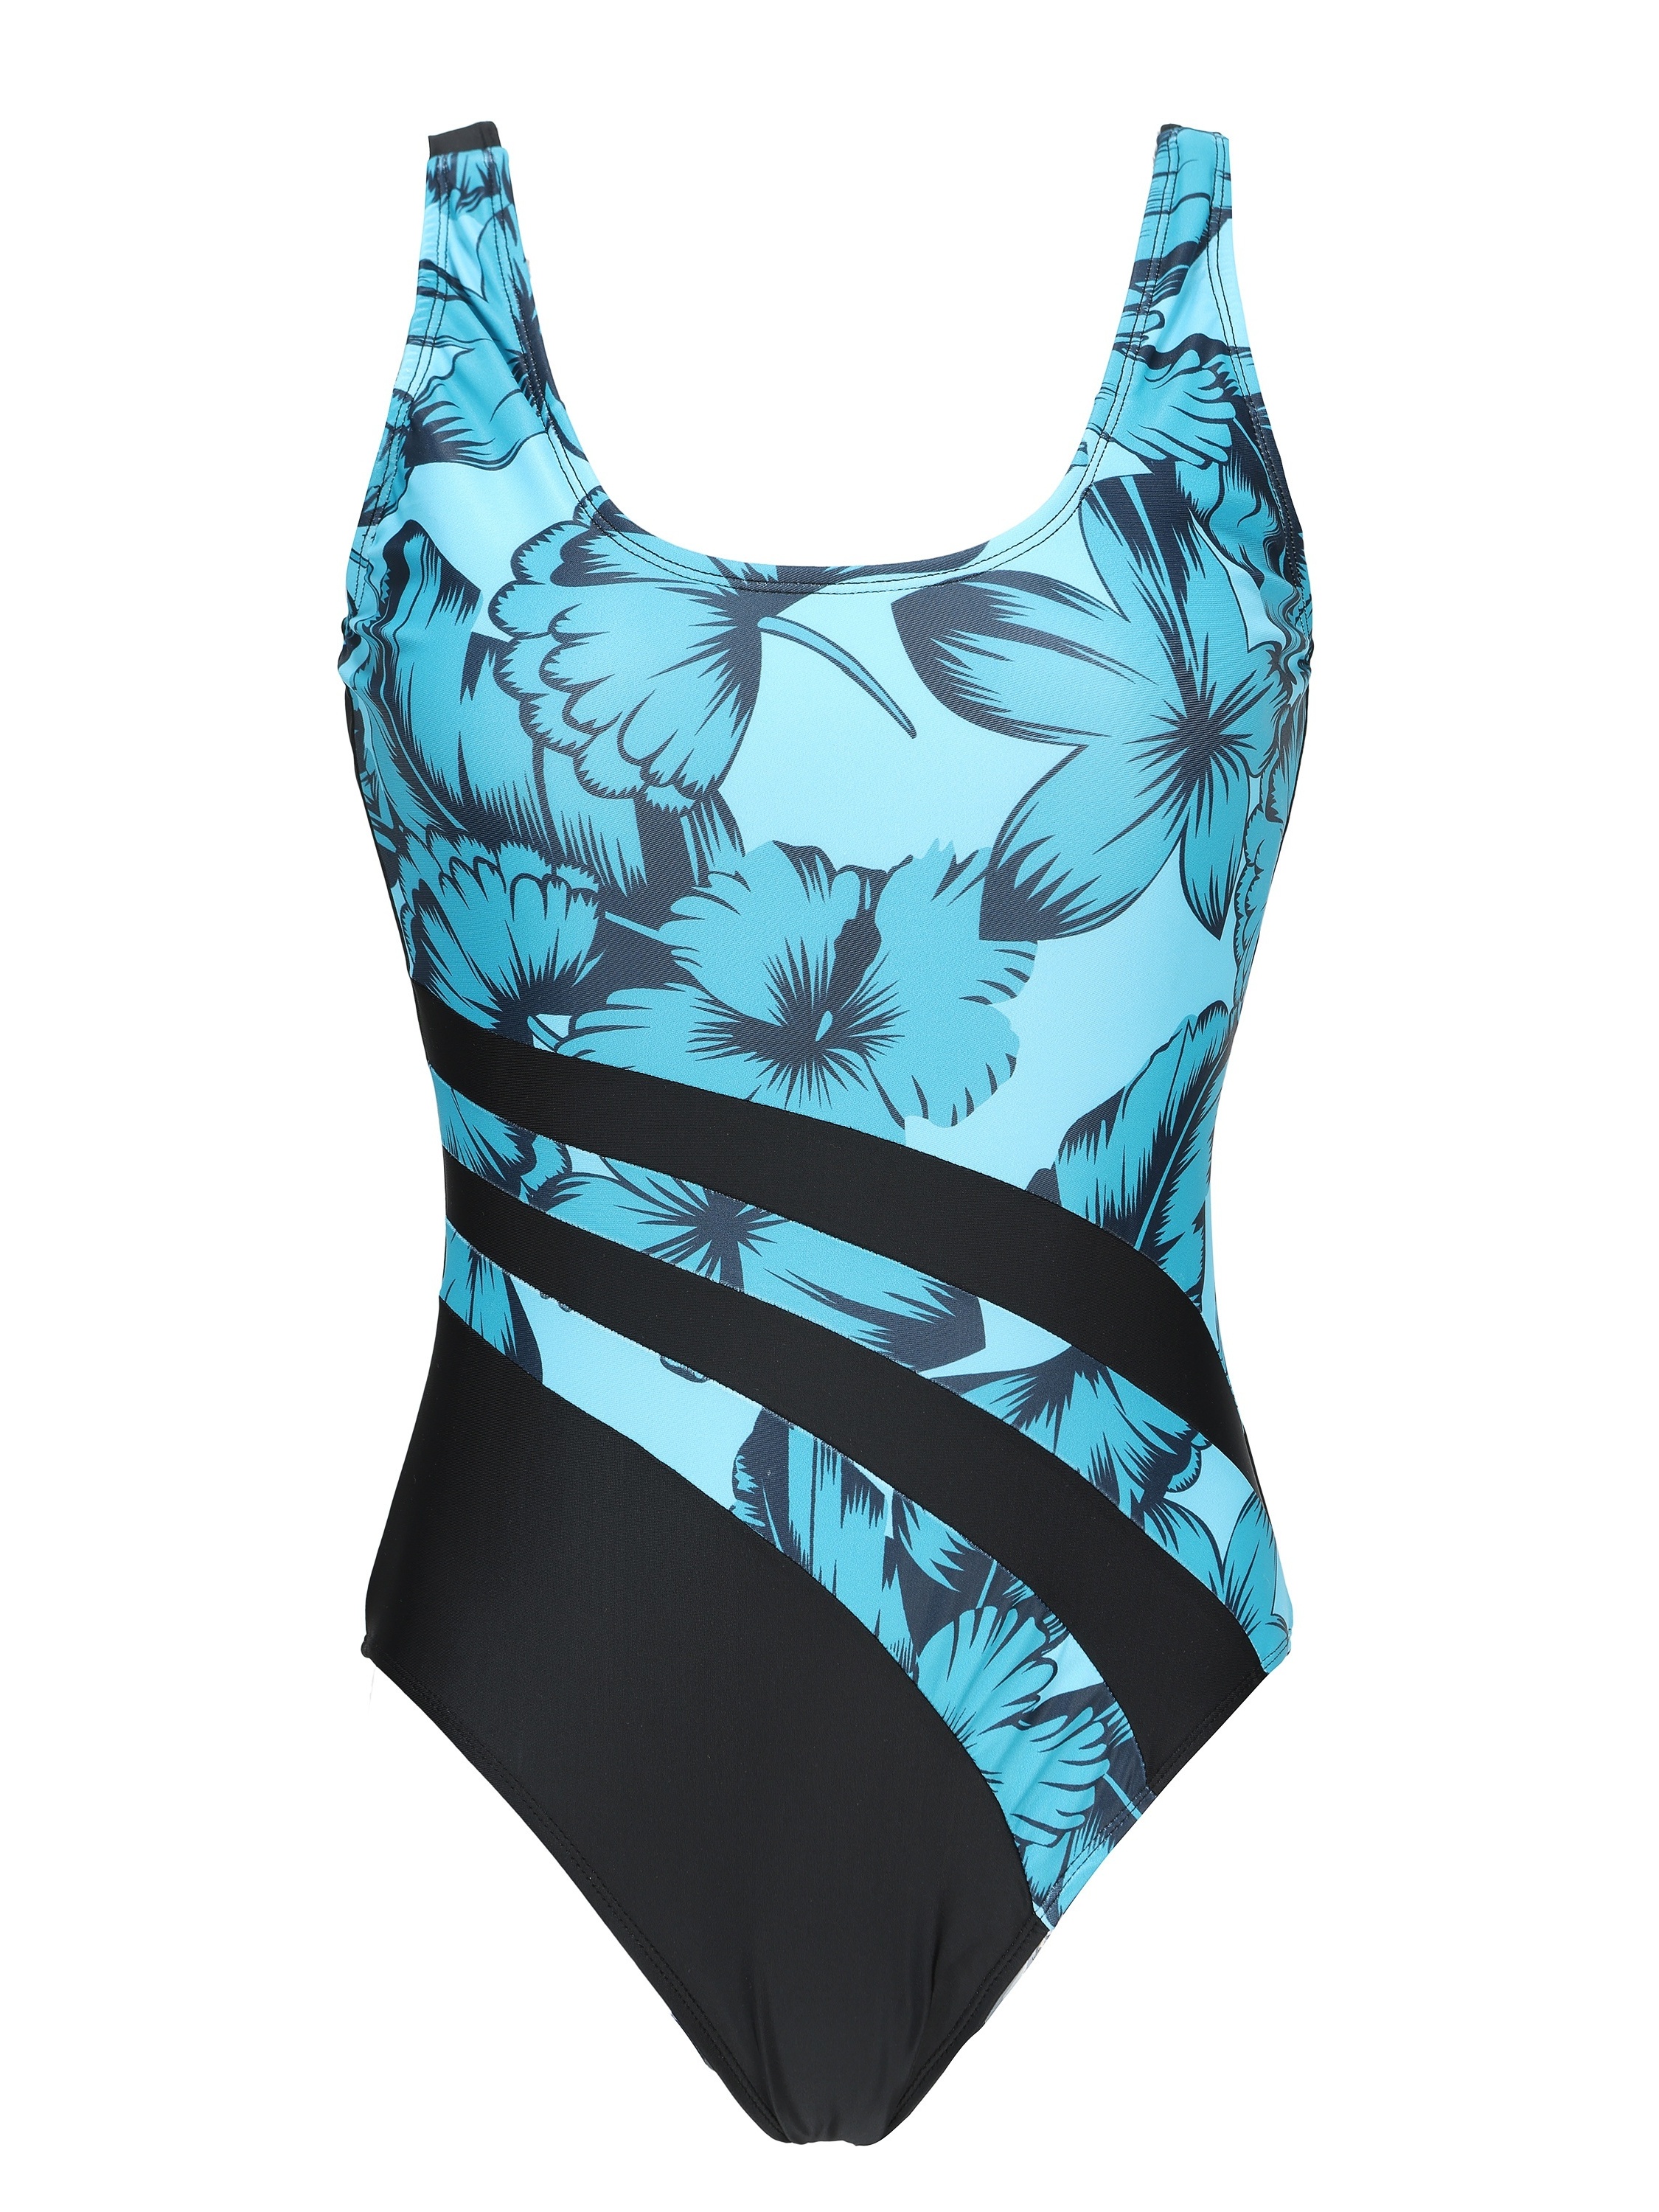 Women's Ruffle Strap Tie Wrap One Piece Swimsuit - Shade & Shore Small,  Teal